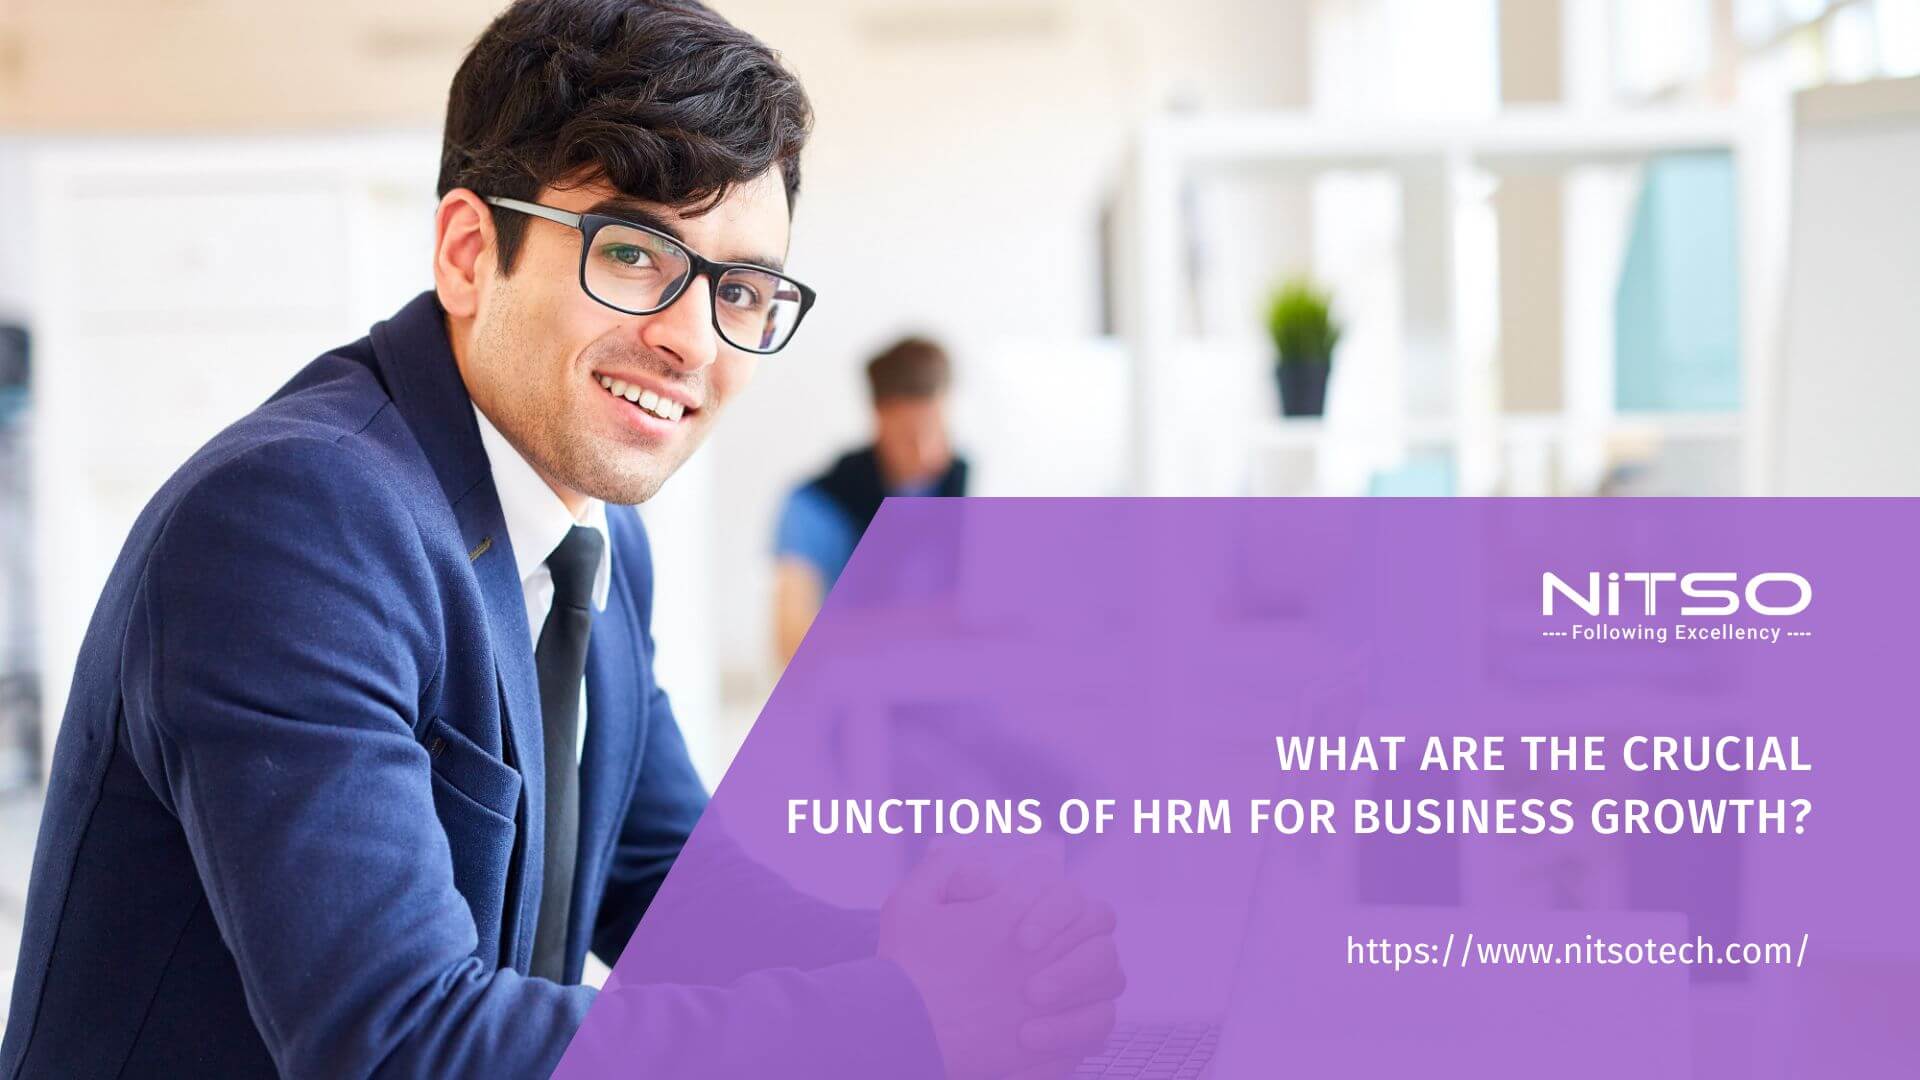 Discovering the Vital Functions of HRM for Optimizing Results